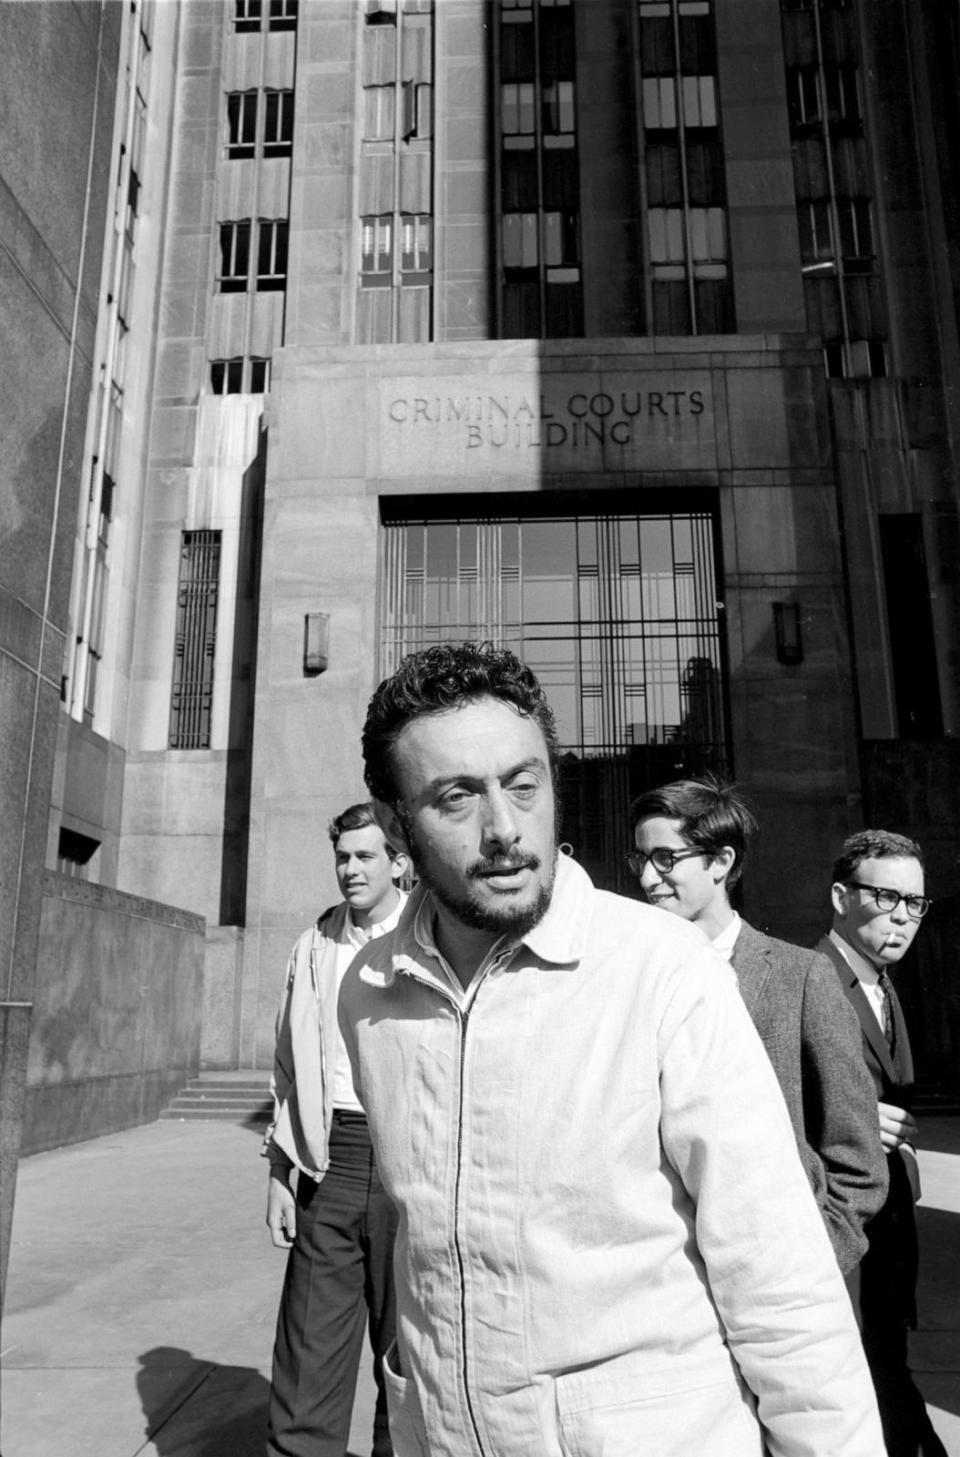 PHOTO: In this June 17, 1964, file photo, stand-up comedian Lenny Bruce walks out of the building at his obscenity trial in New York. (Ben Martin/Getty Images, FILE)